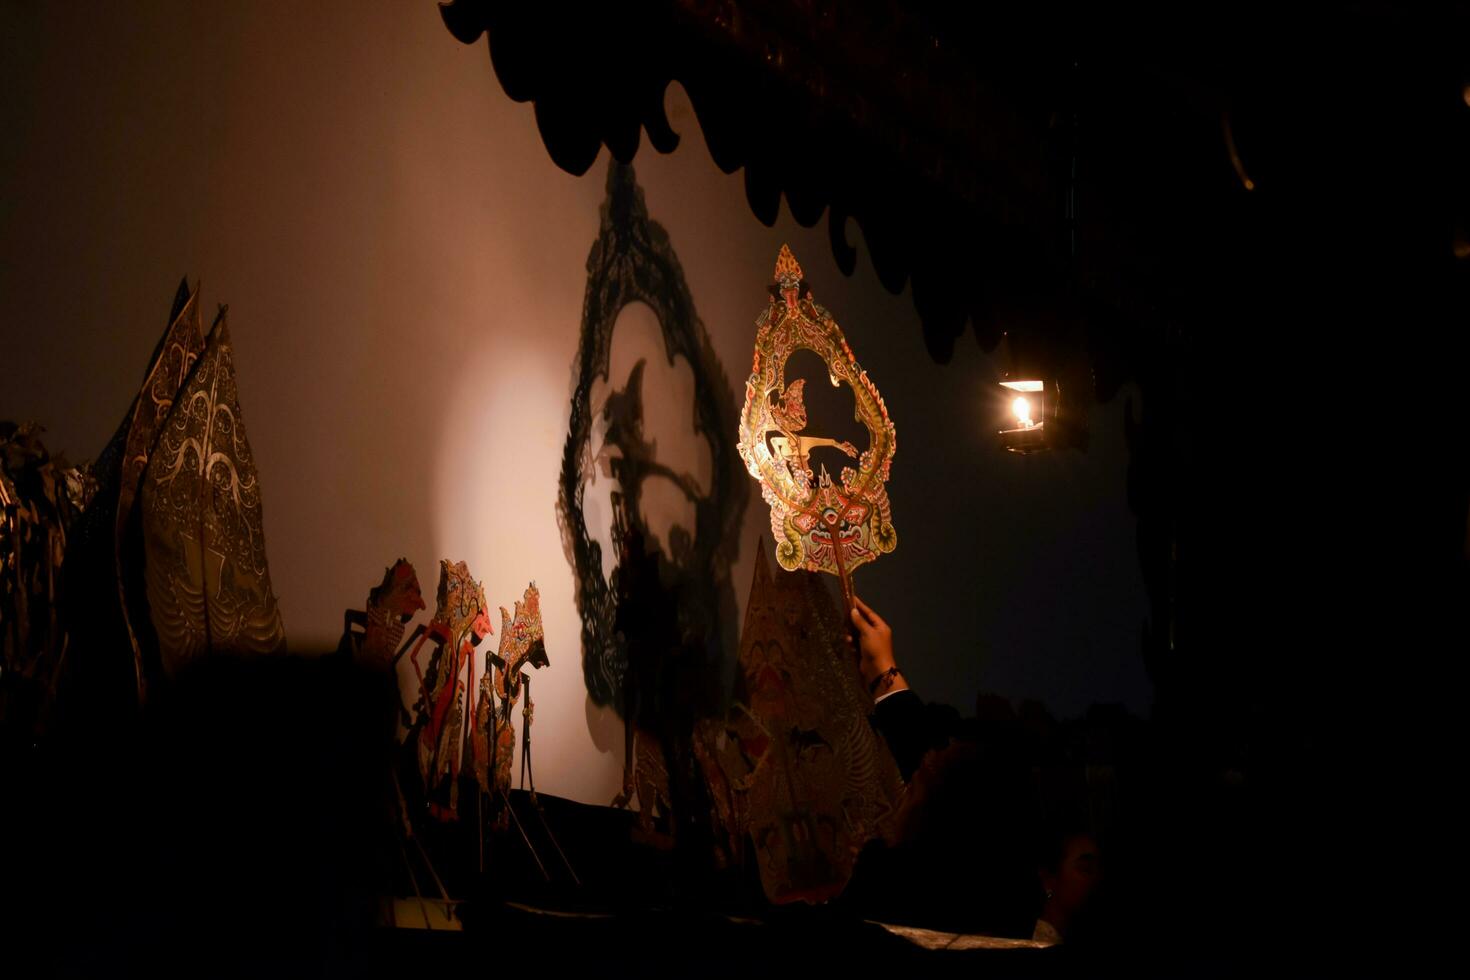 A man perform with wayang or traditional javanese puppet on stage at night. Tuban, Indonesia - 22 September, 2023. photo